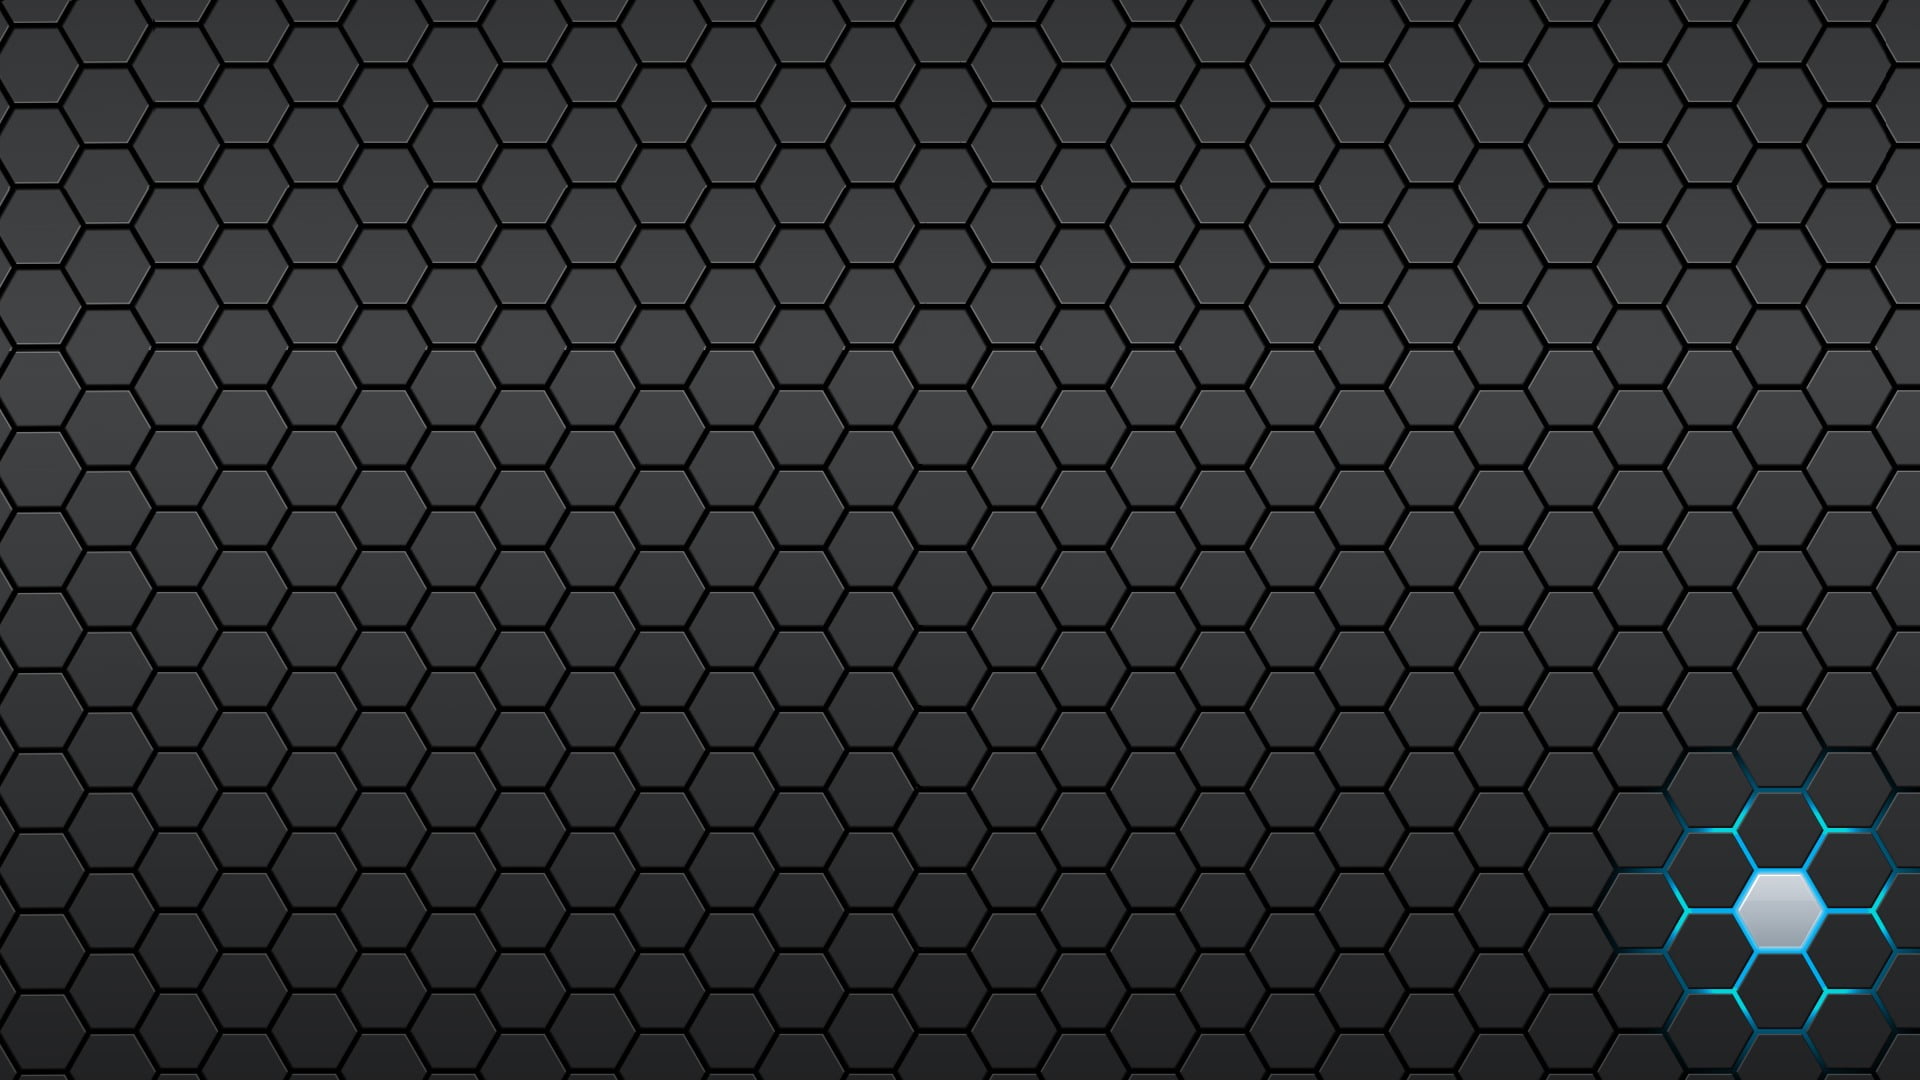 pattern, hexagon, backgrounds, no people, abstract, close-up